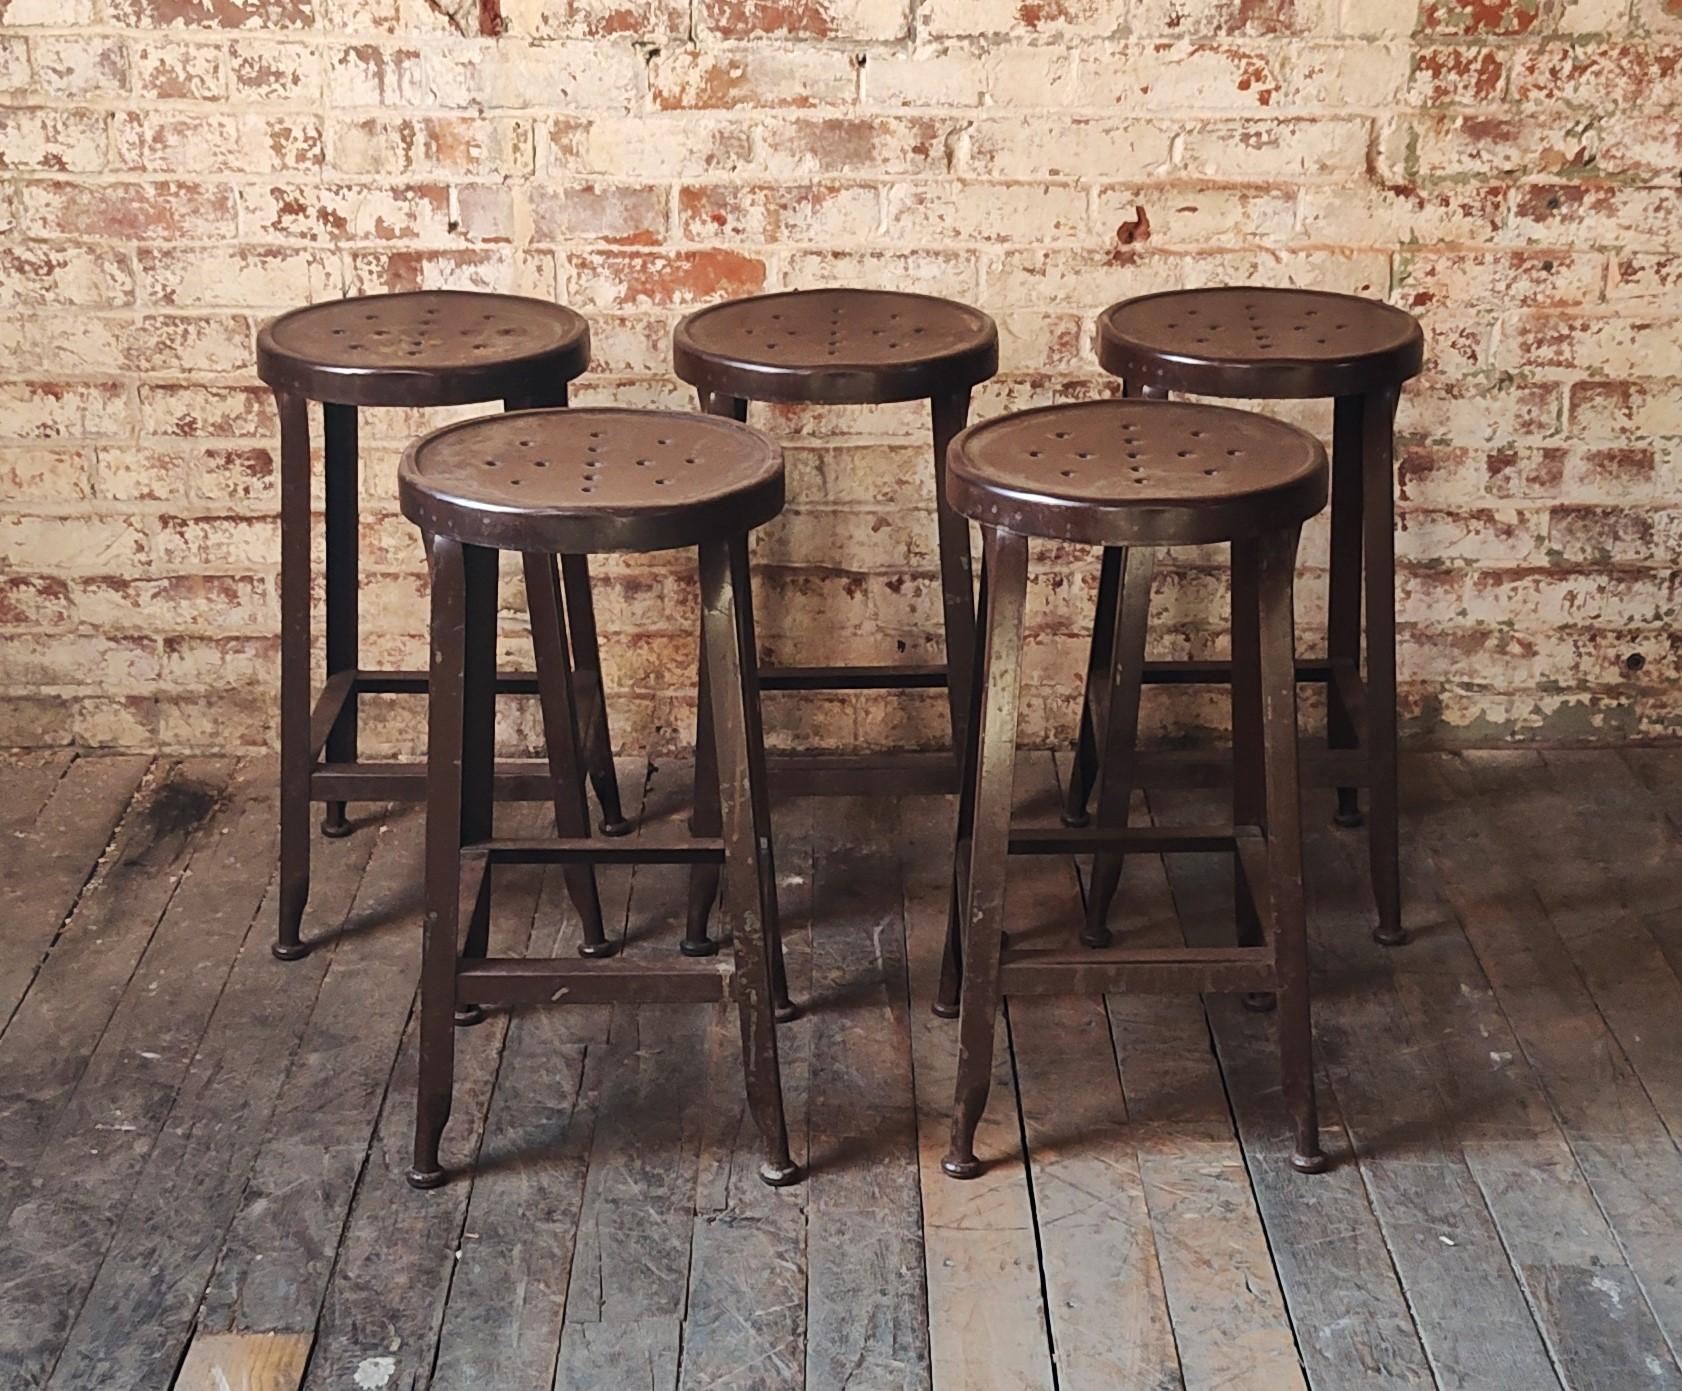 20th Century Vintage Industrial Stools For Sale